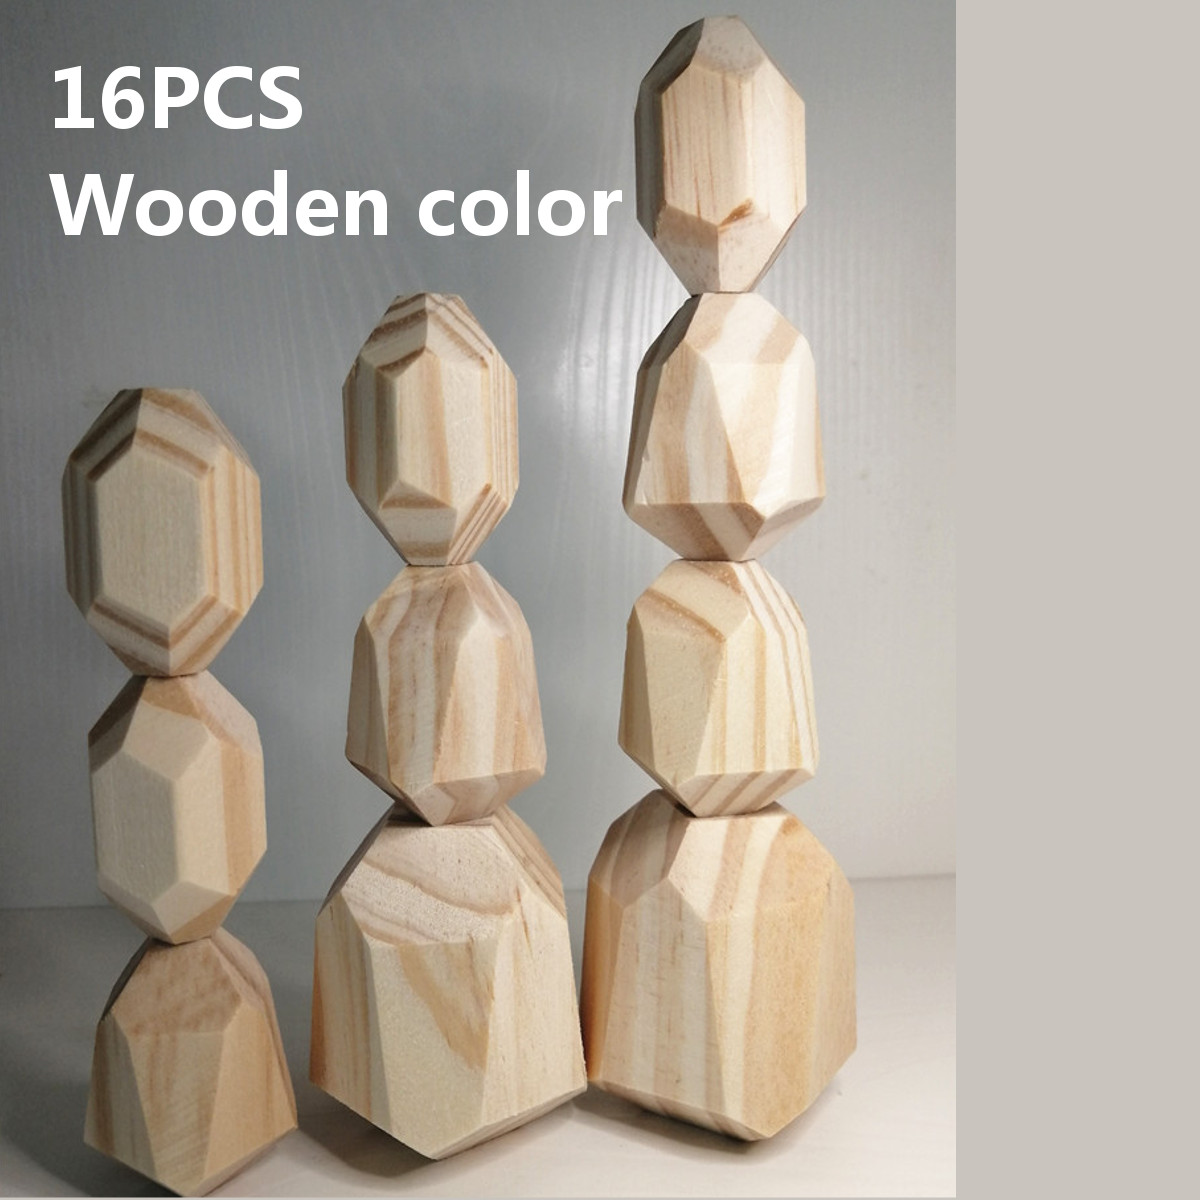 101626-Pcs-Wood-Colorful-Stone-Stacking-Game-Building-Block-Education-Set-Toy-for-Kids-Gift-1887123-5